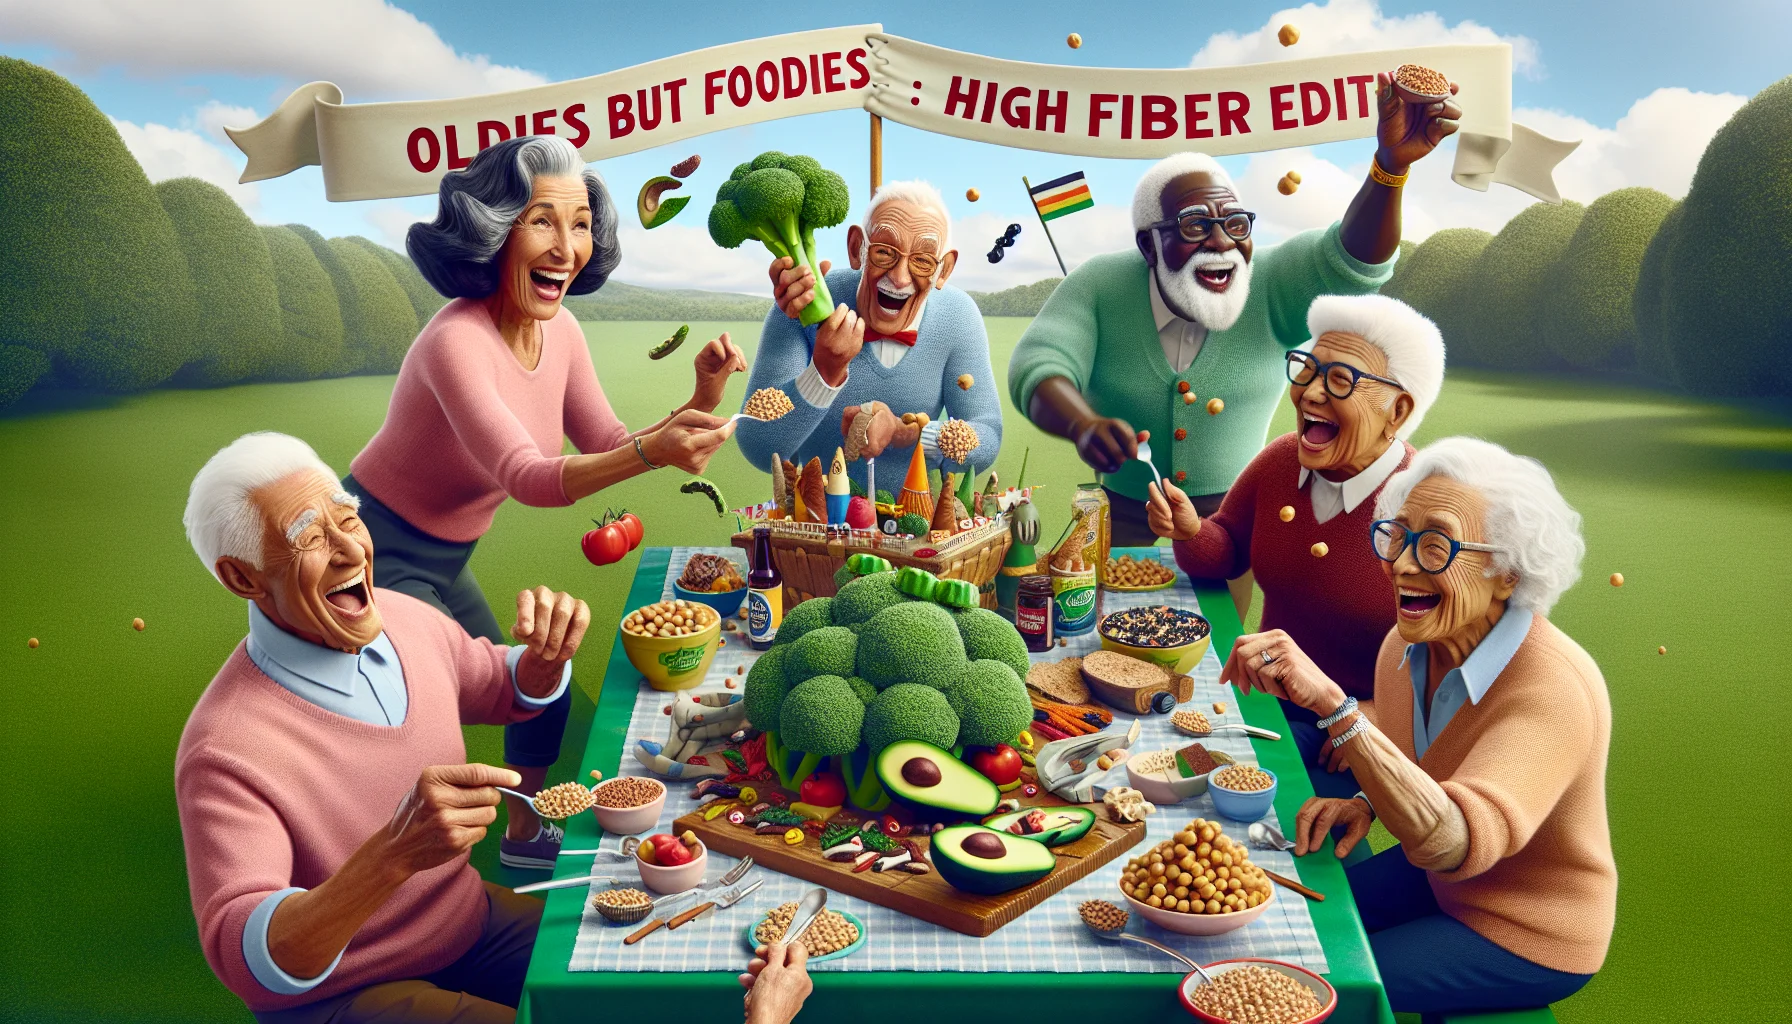 Visualize a lively scene depicting an energetic seniors' day out. A group of old friends - a brunette Caucasian woman, a balding African-American man, a white-haired Asian woman, and a middle-aged Hispanic man with a mustache - are enthusiastically gathered around a picnic table. In the center of the table, instead of traditional snacks, there's a whimsical spread of high fiber foods creatively displayed. Picture a towering broccoli tree, an avocado boat with whole grain sail, and a garden made up of legume flowers. The friends are laughing, playfully tossing chickpeas into each other's open mouths. Behind them, a banner flutters proclaiming 'Oldies but Foodies: High Fiber Edition'.